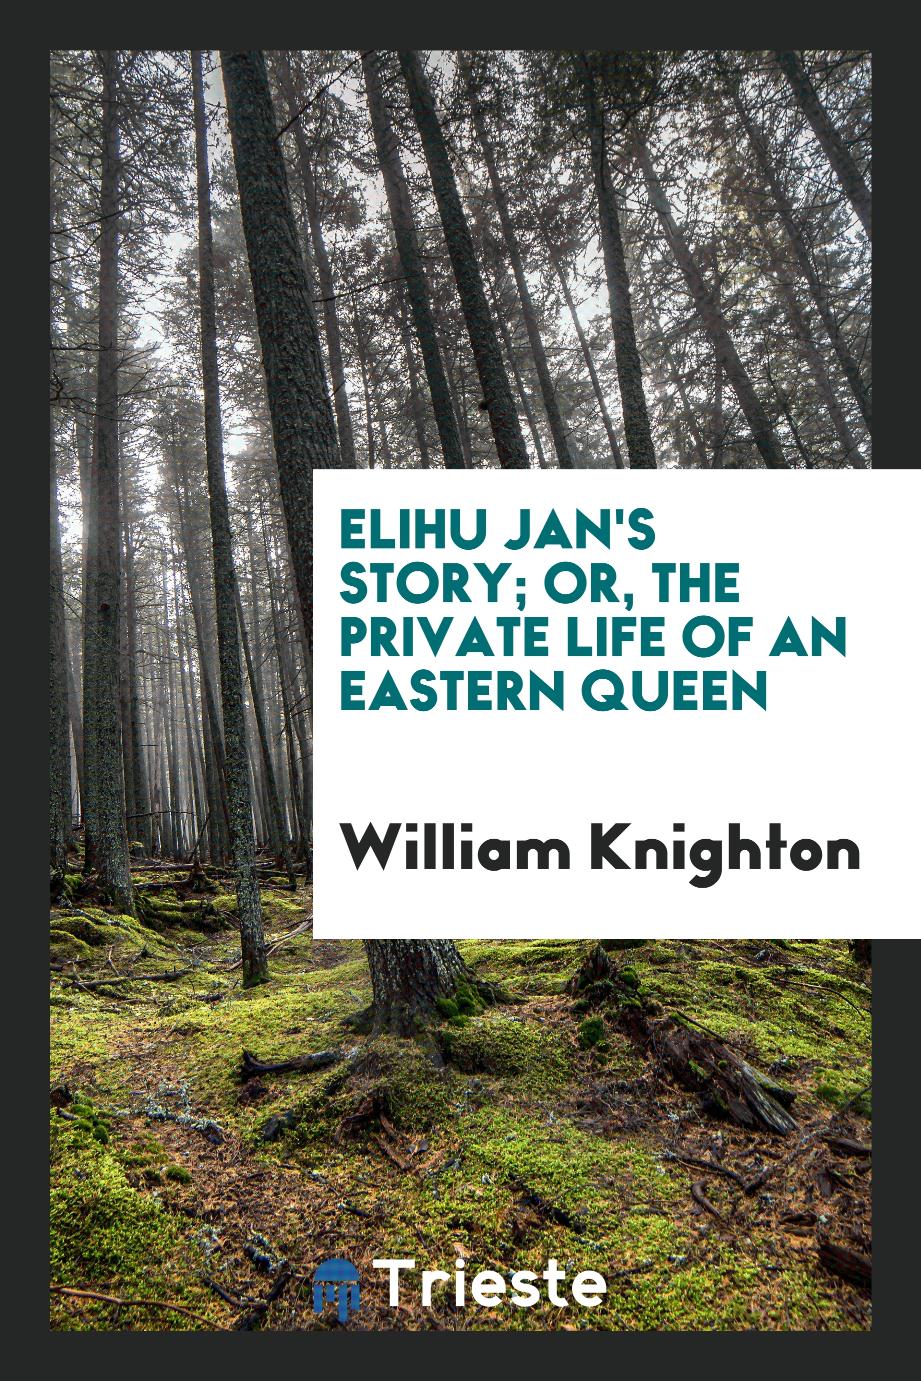 Elihu Jan's story; or, The private life of an eastern queen